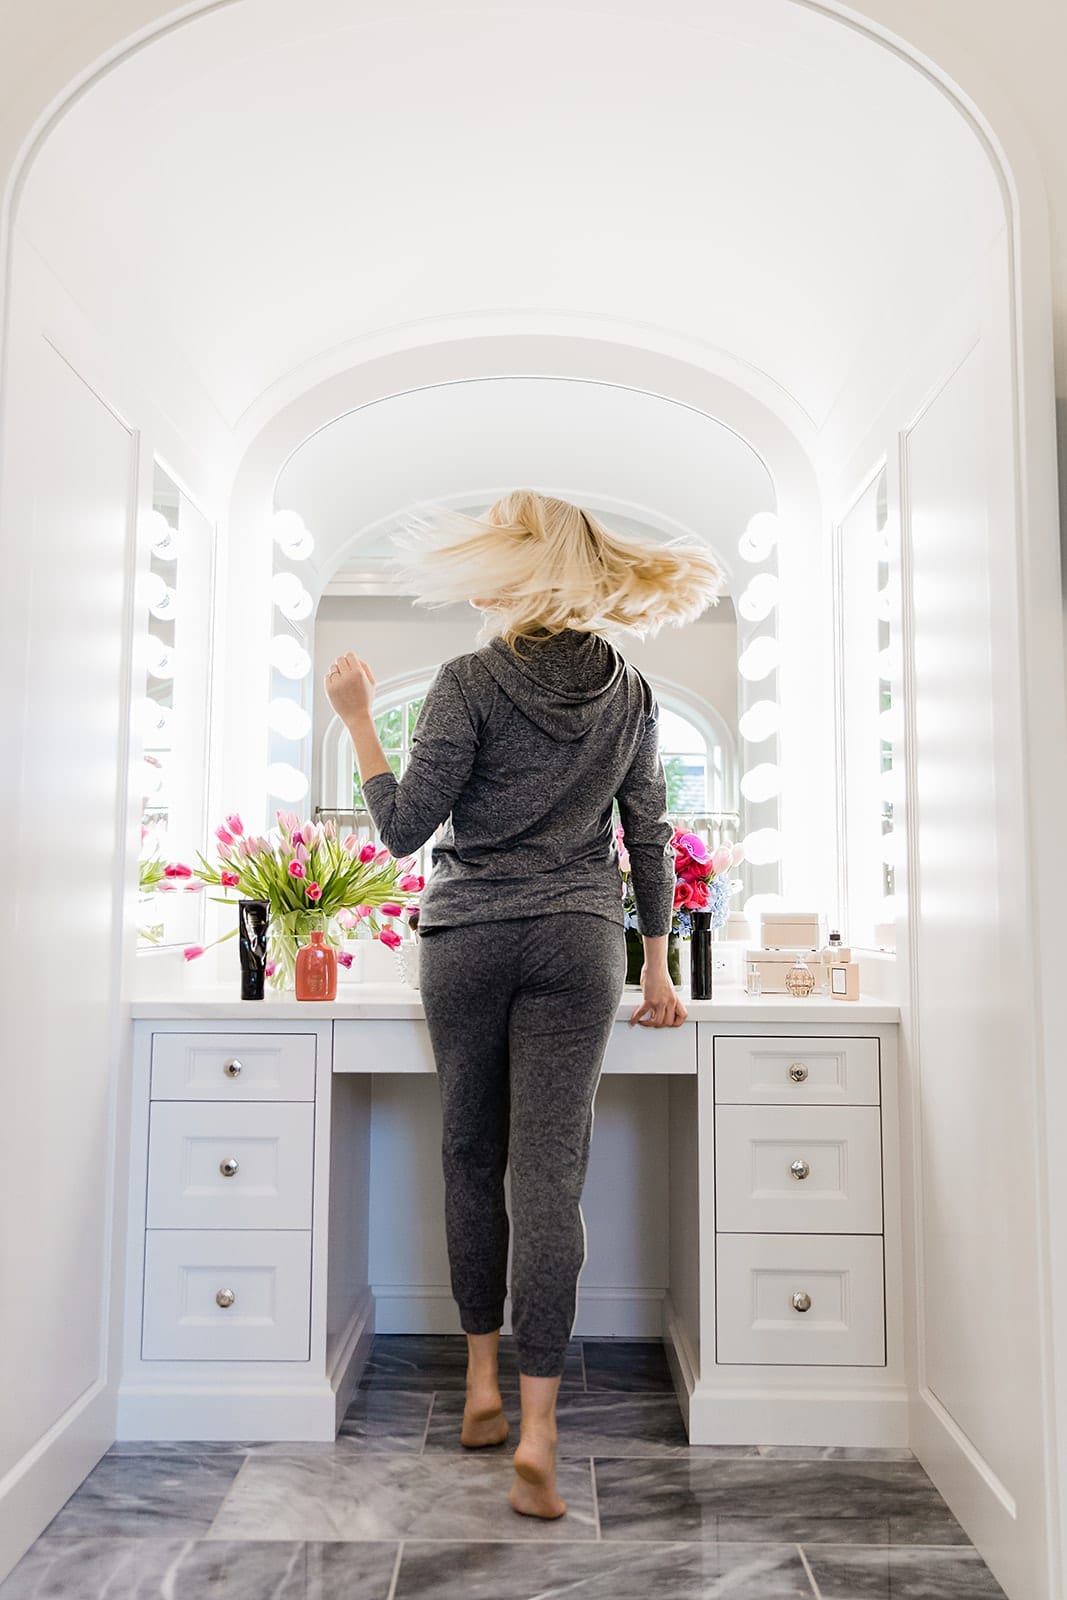 Wearing Vuori joggers for women, the lifestyle blogger Kelly Page for BlueGrayGal shares what her blonde hair looks like after using the Oribe blonde shampoo and Oribe conditioner.